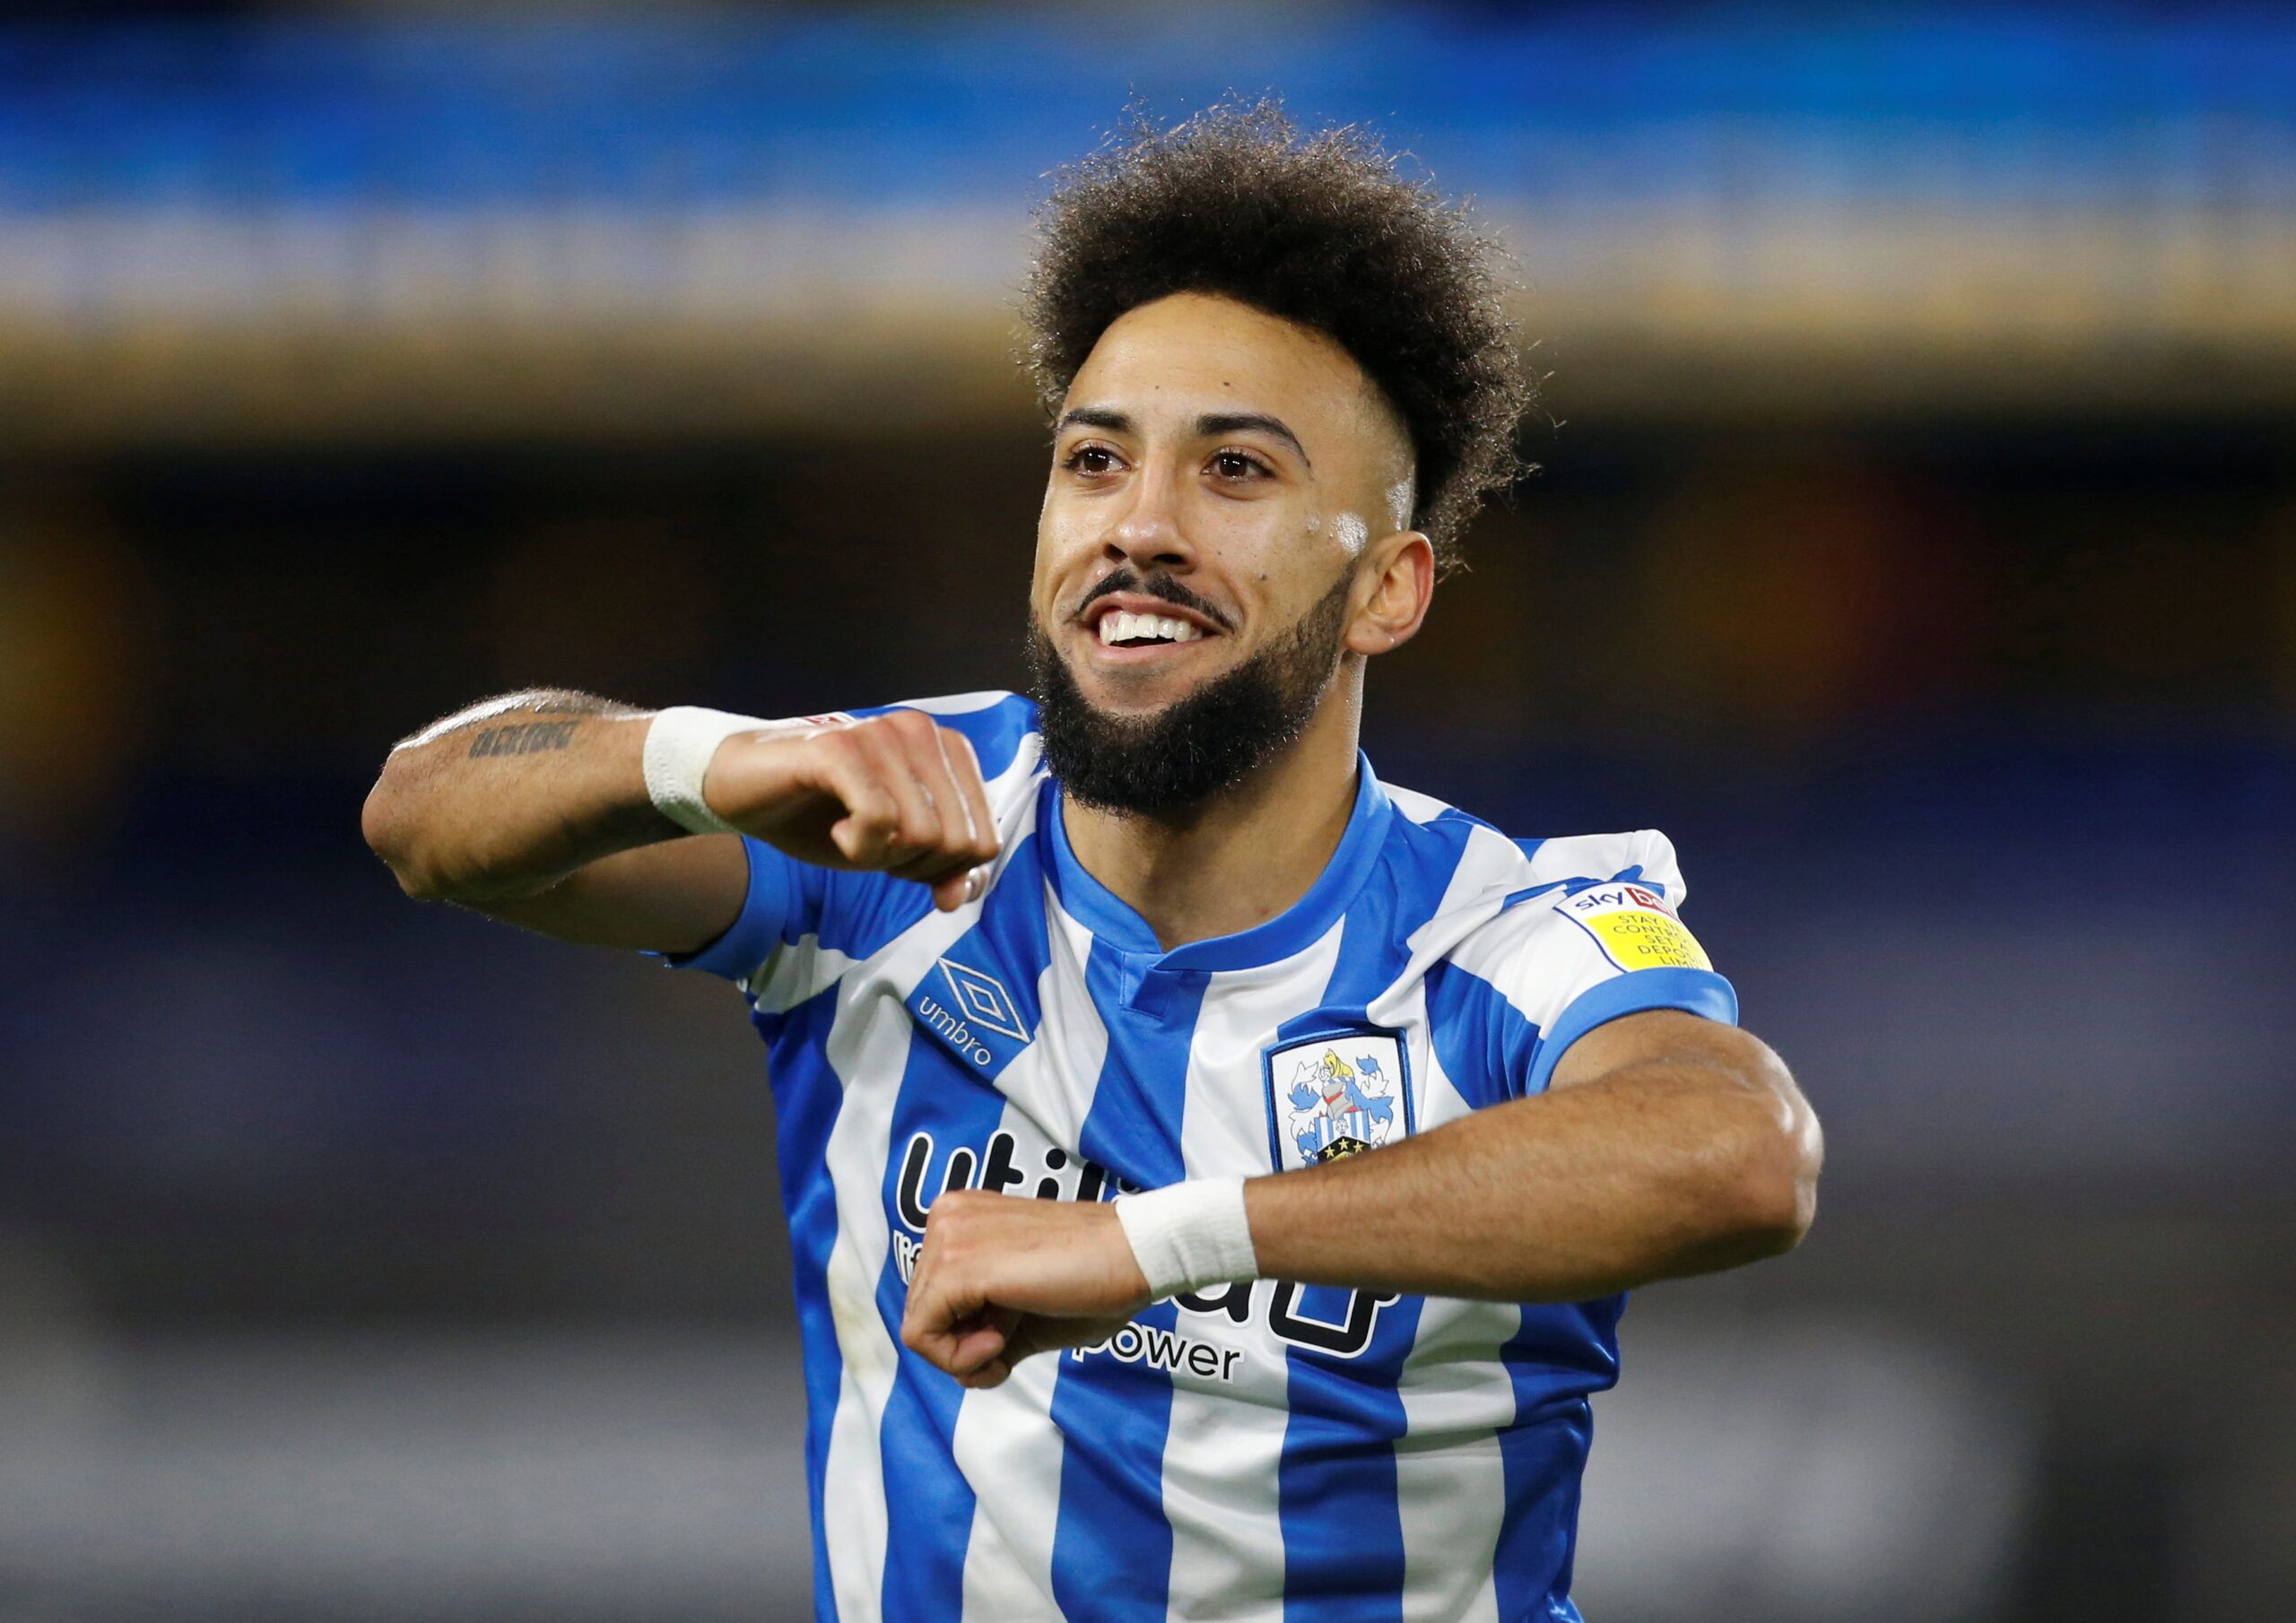 Soccer Football - Championship - Huddersfield Town v Peterborough United - John Smith's Stadium, Huddersfield, Britain - March 4, 2022 Huddersfield Town's Sorba Thomas celebrates after the match Action Images/Ed Sykes  EDITORIAL USE ONLY. No use with unauthorized audio, video, data, fixture lists, club/league logos or 